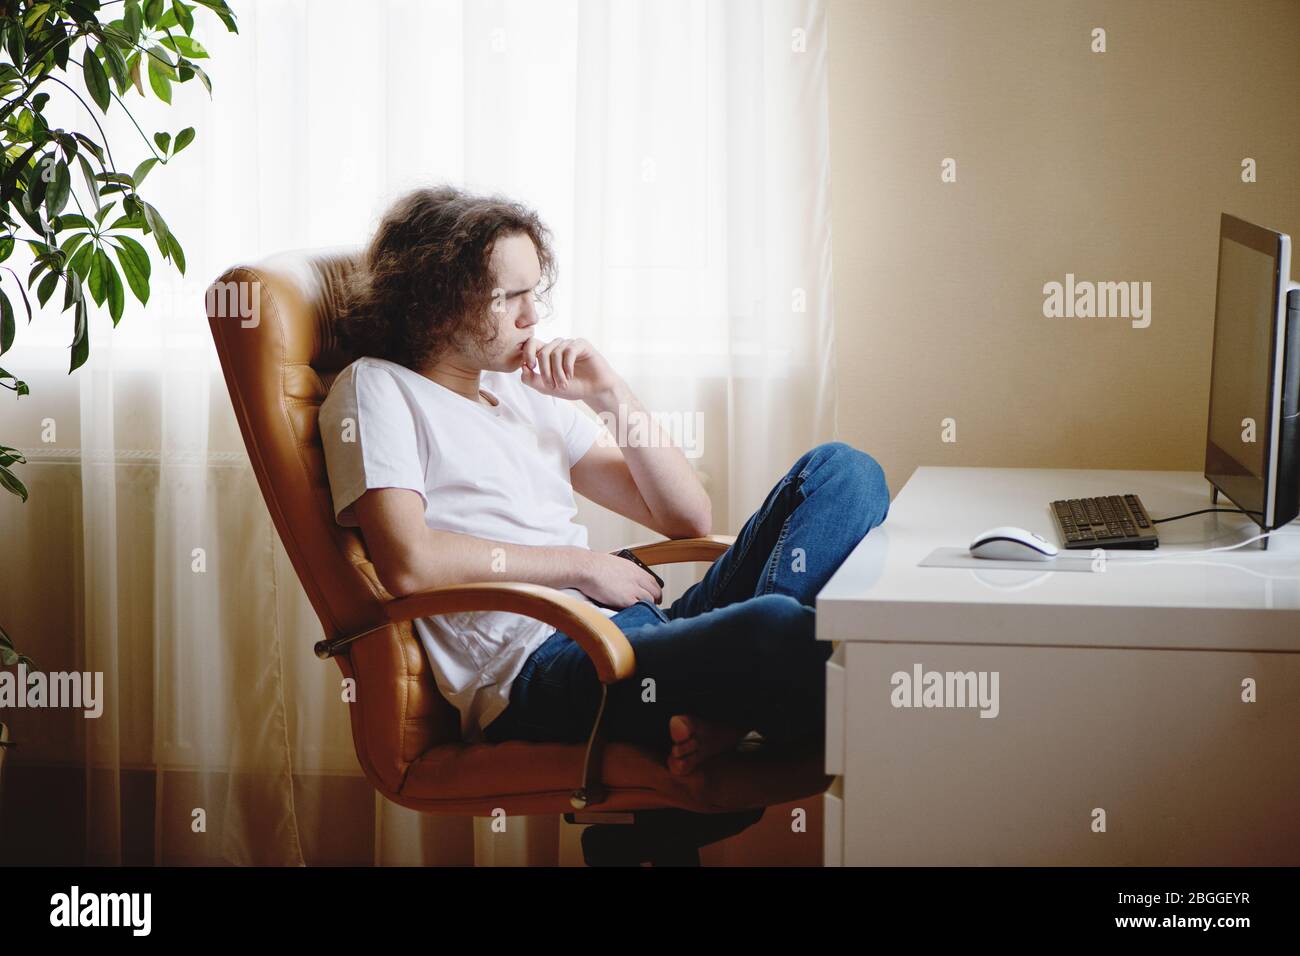 Teenager sitting on chair and concentrated studying at home attending online classes. Stock Photo